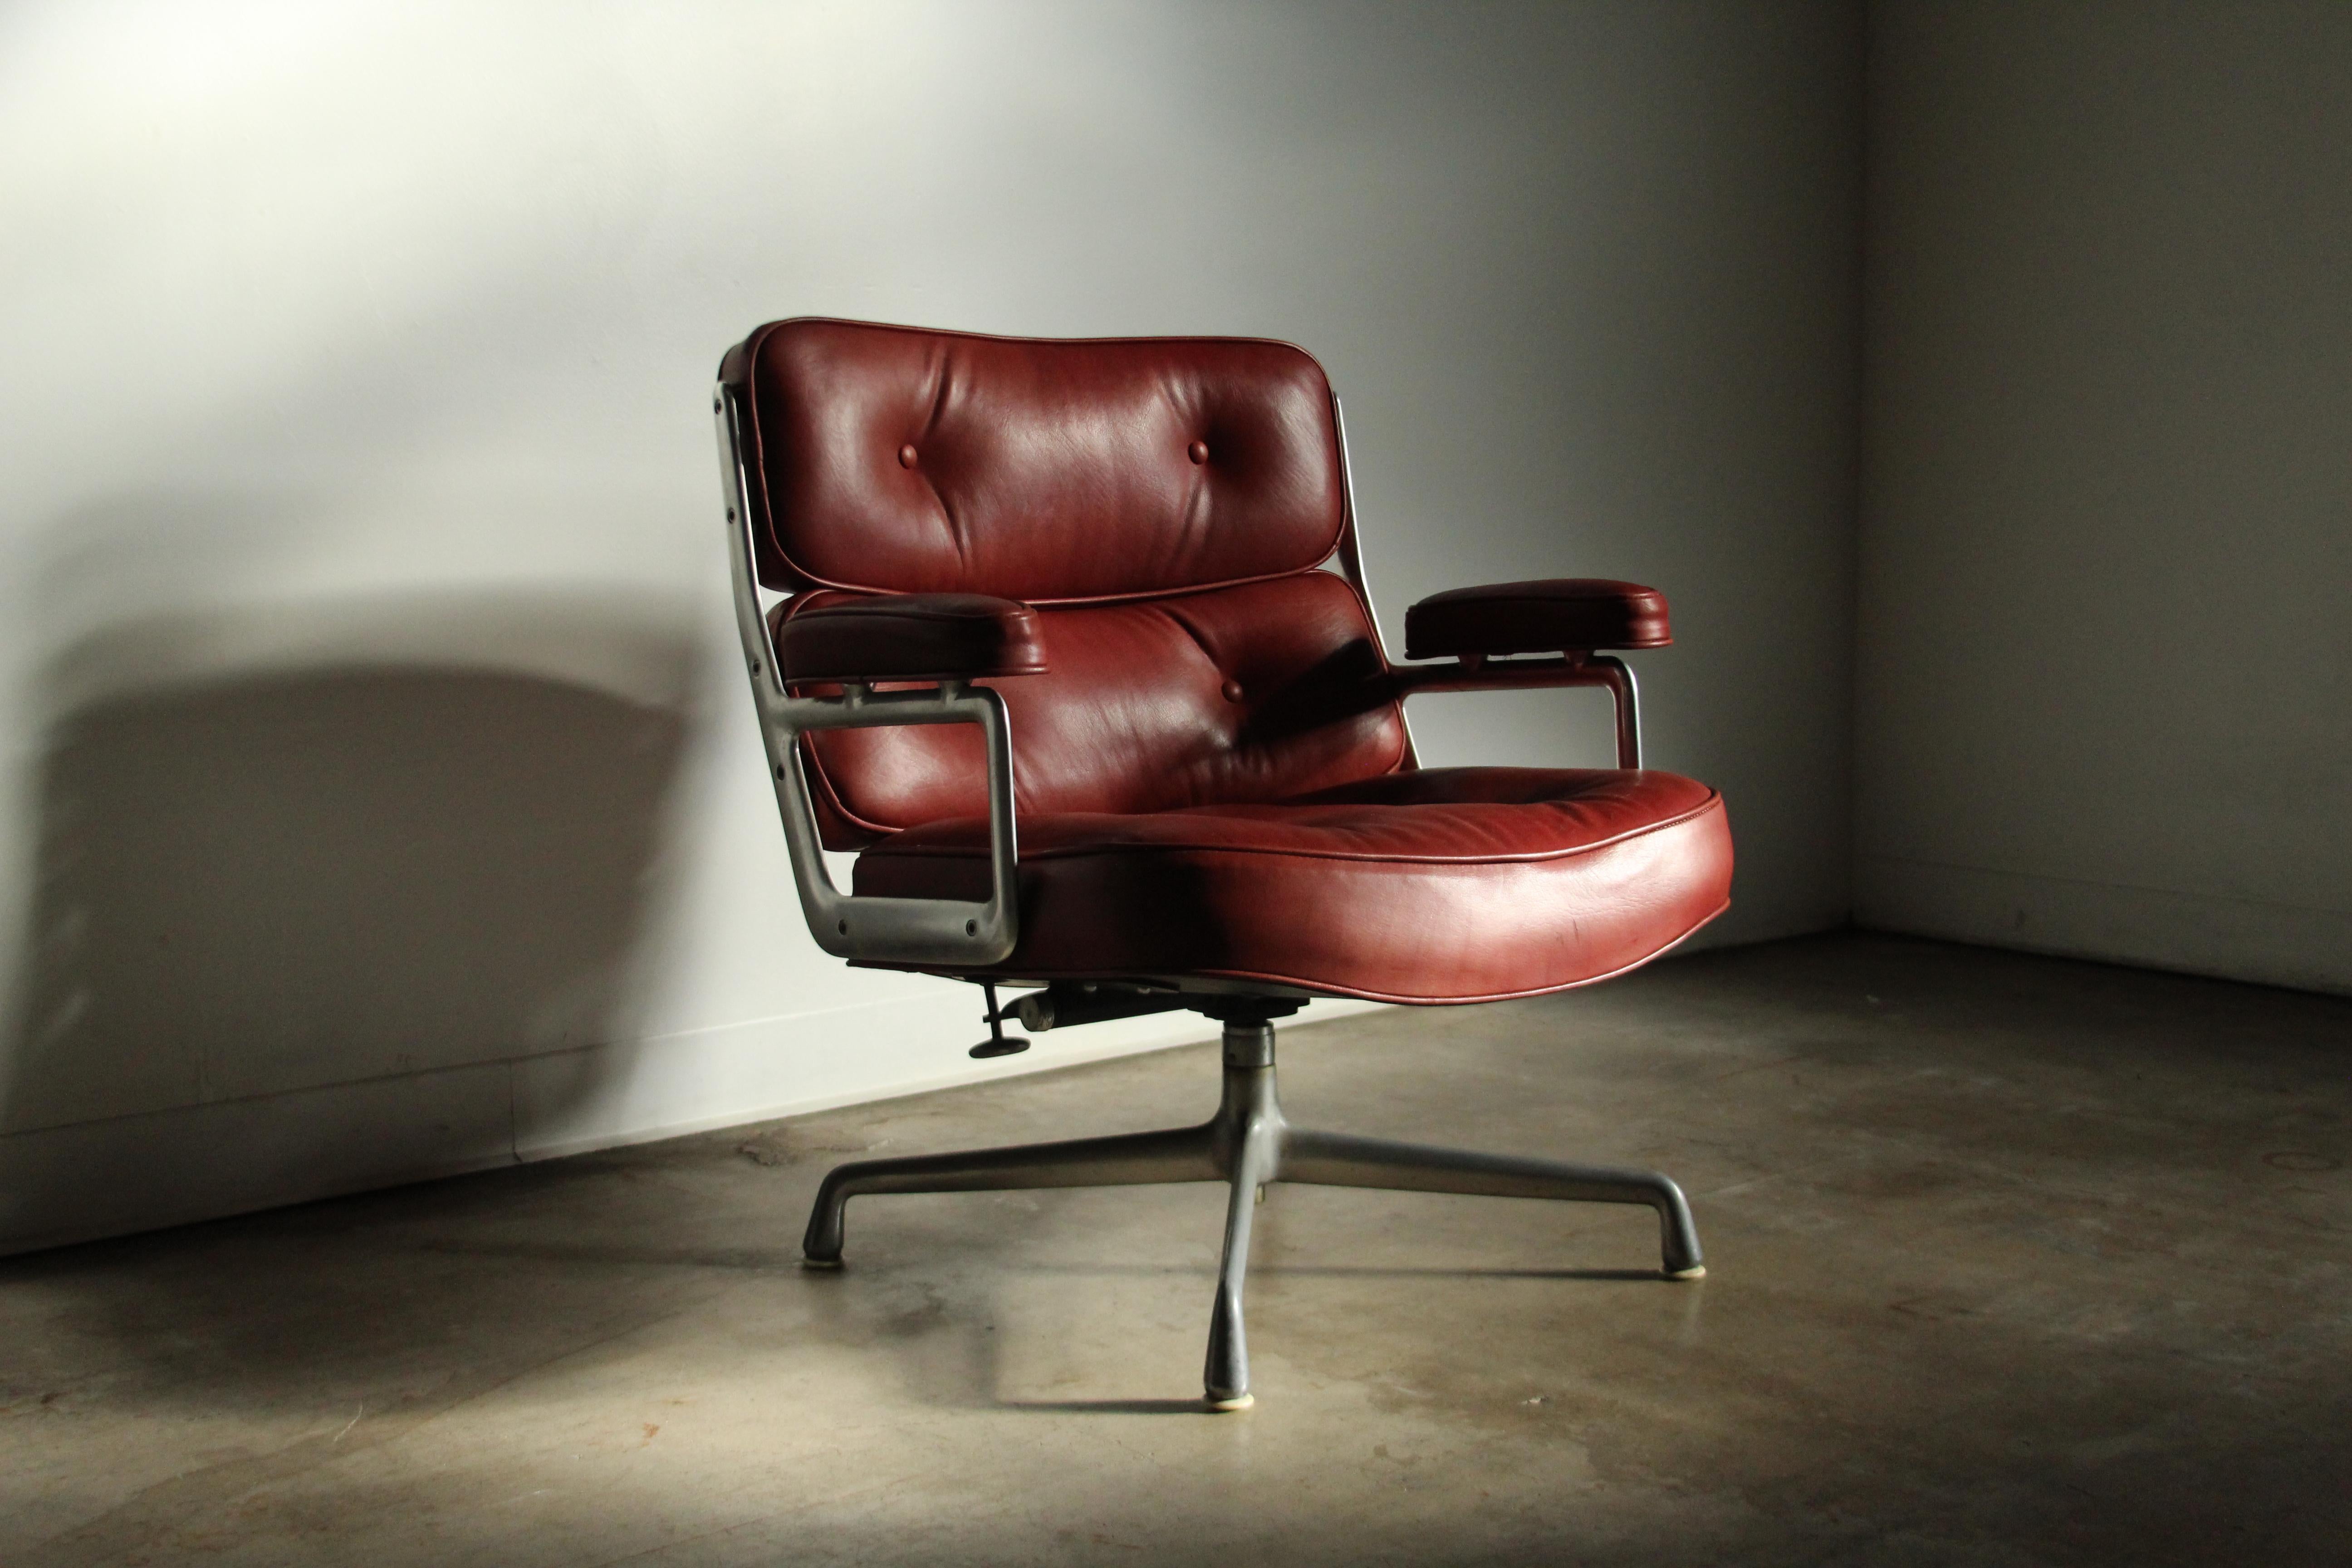 Eames Time Life Lobby Lounge Chair in Oxblood Calfskin Leather, 1960s For Sale 2